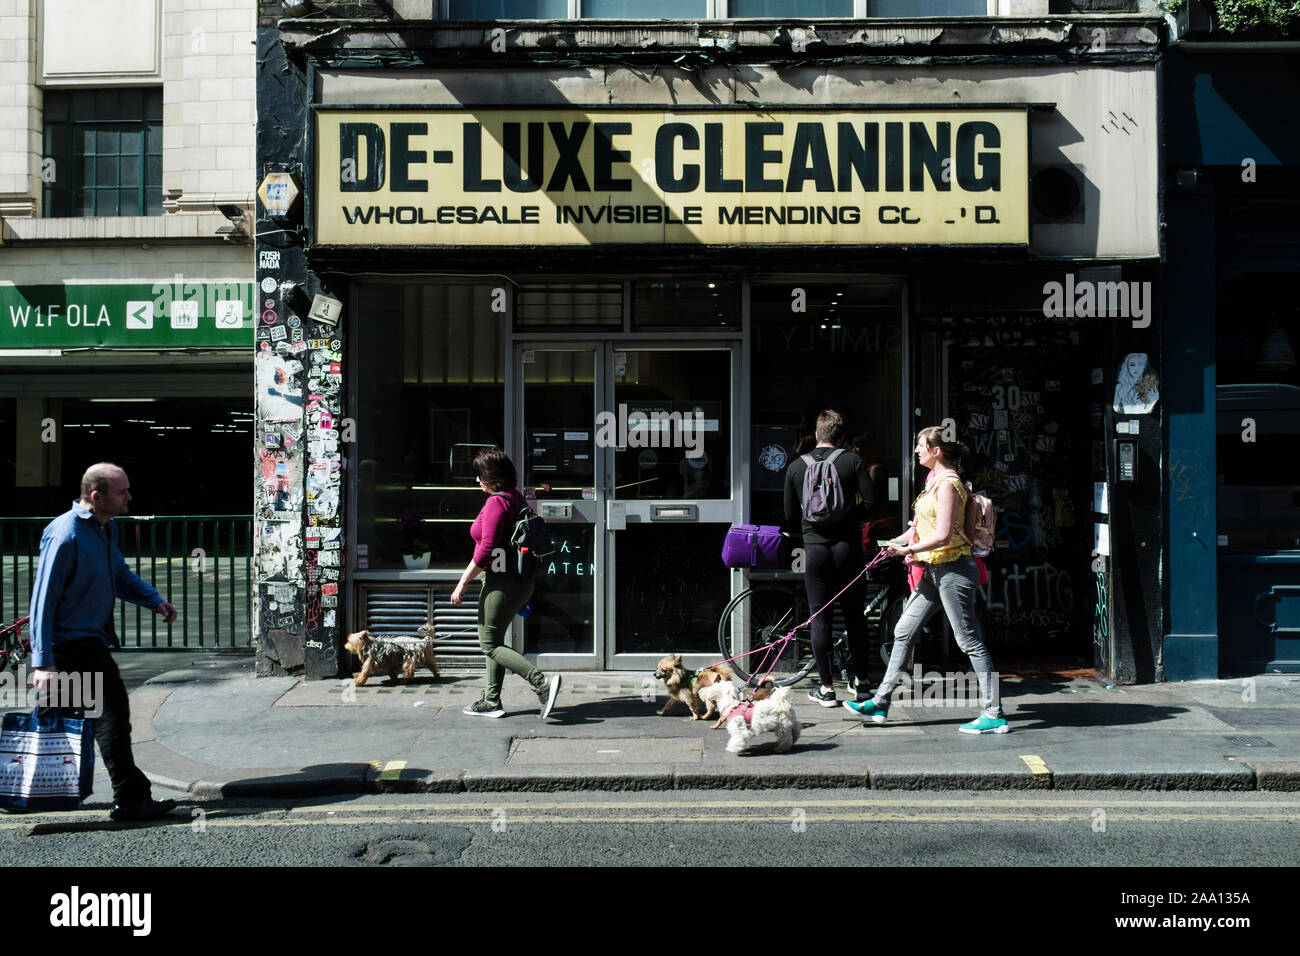 Exterior signage of old dry cleaning and clothes mending premises. Brewer street, Soho, London. Stock Photo